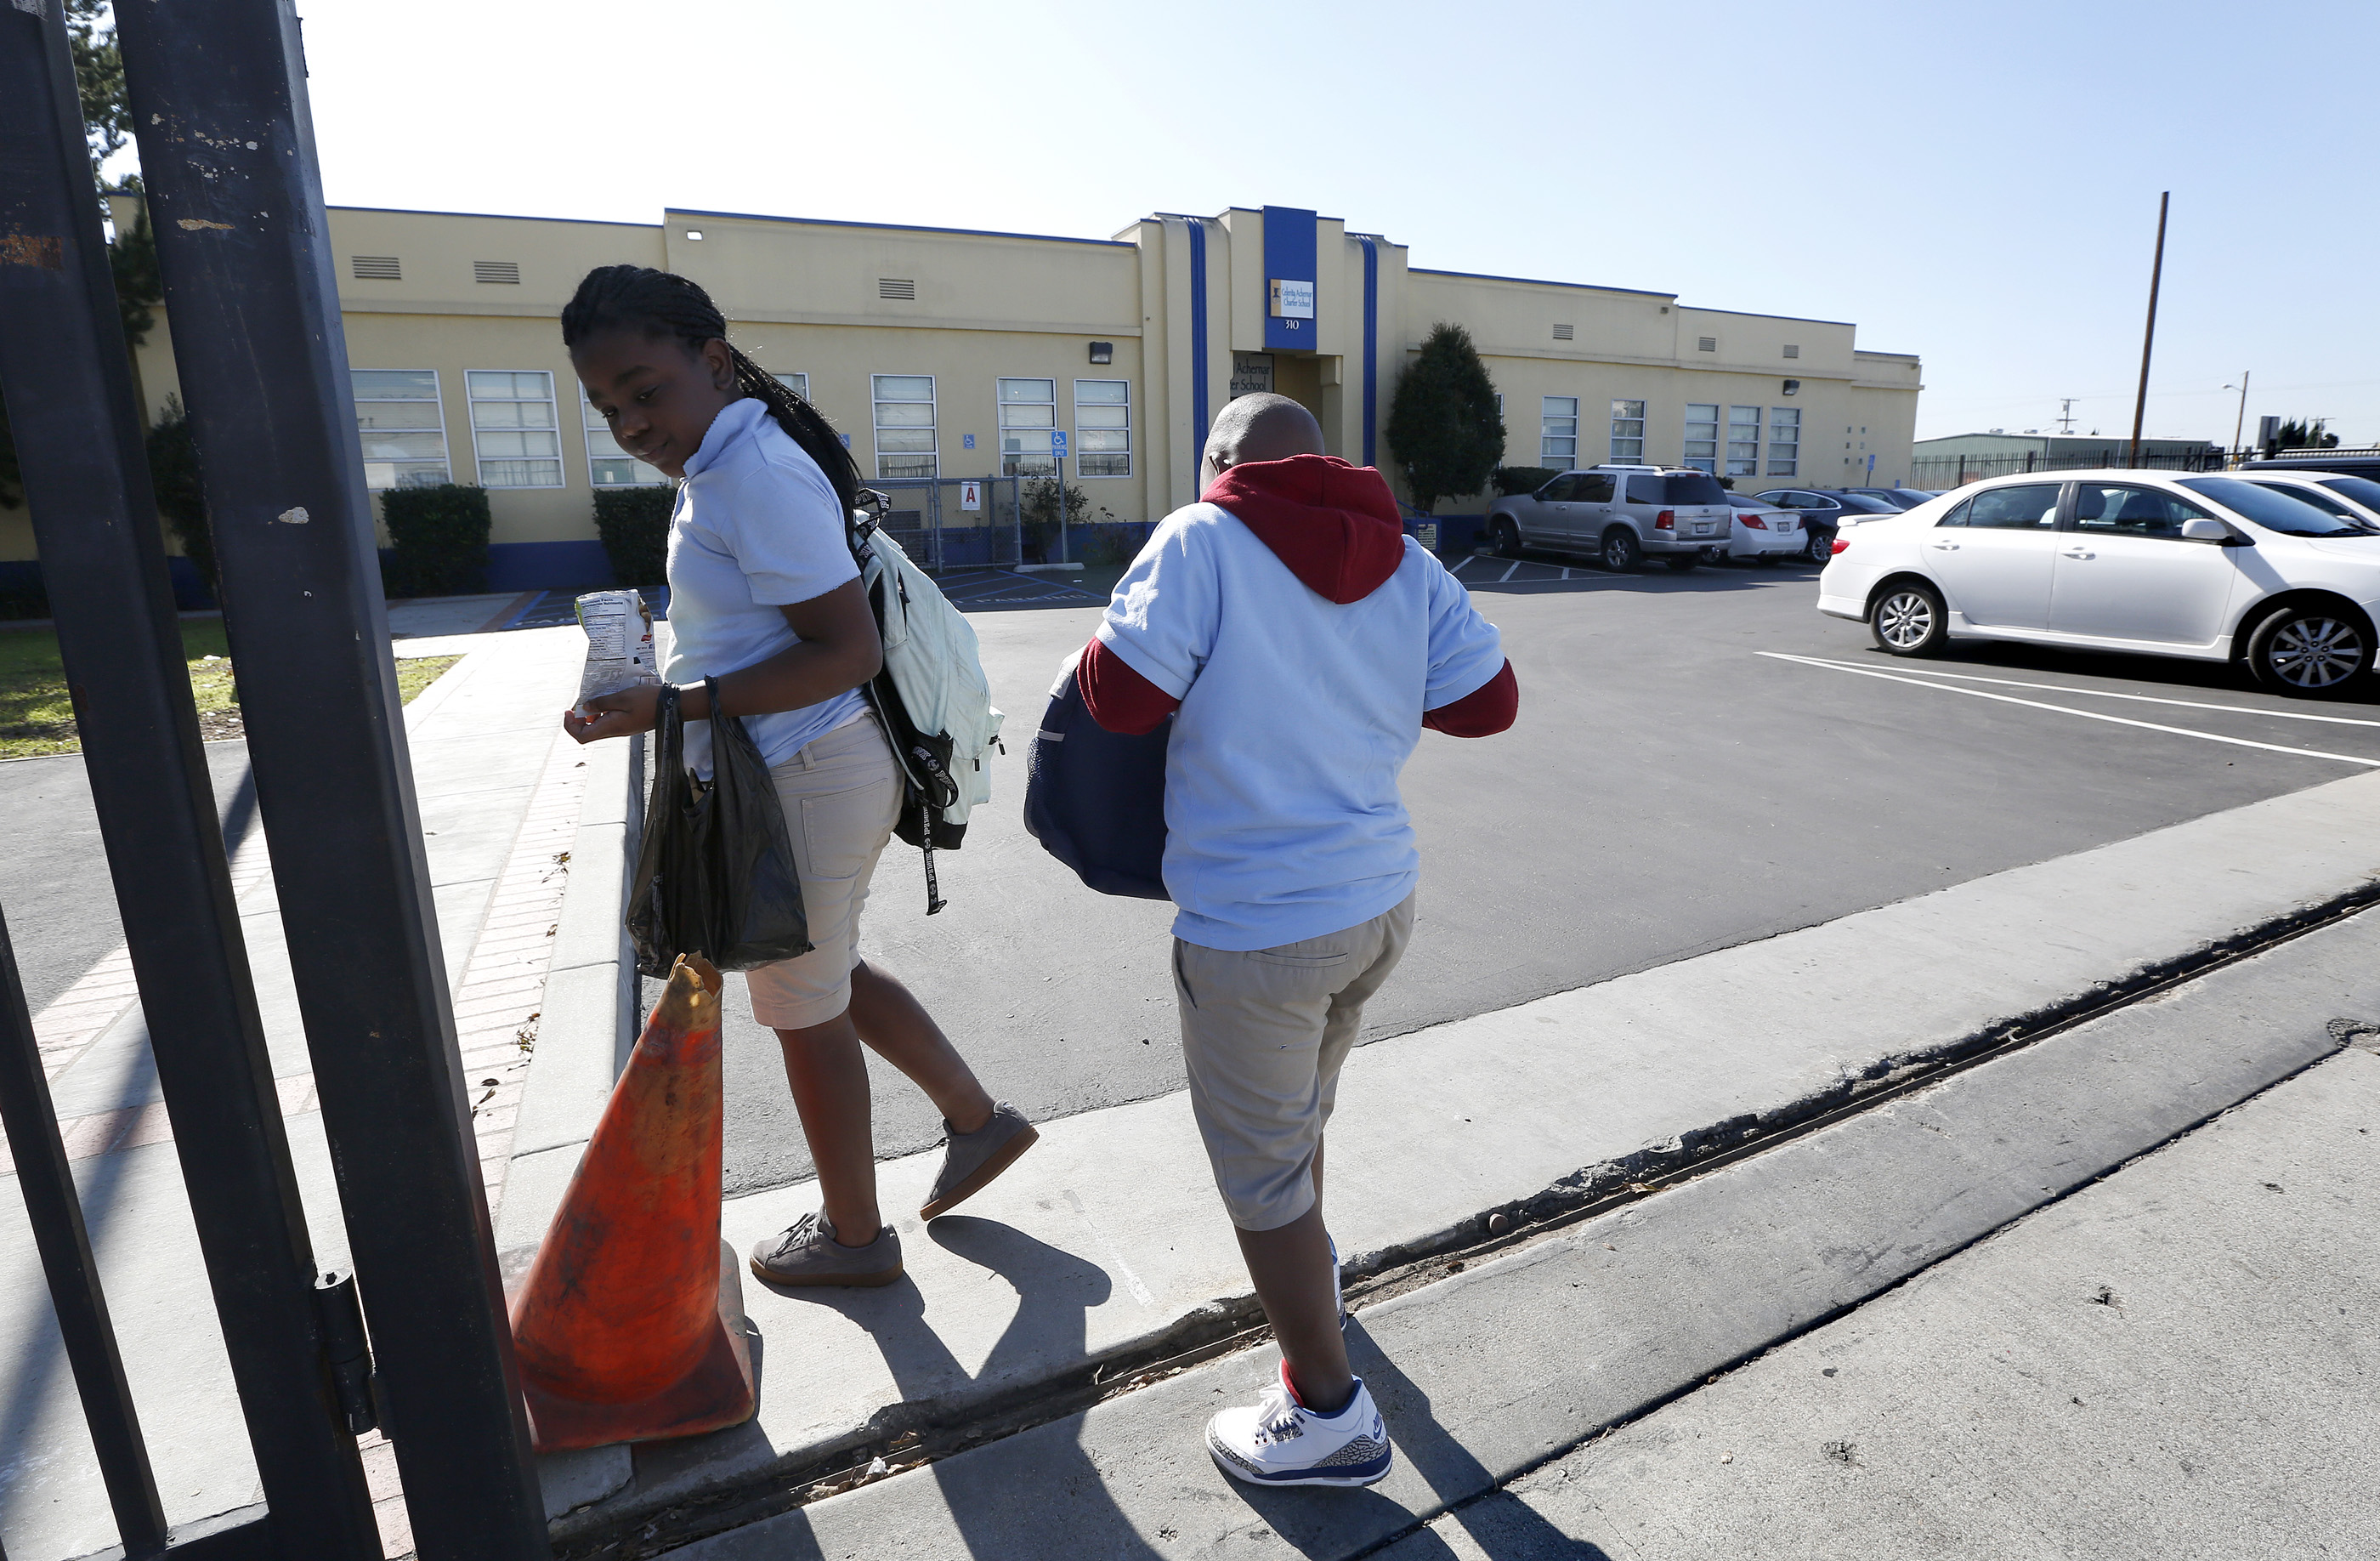 01/25/17/ LOS ANGELES/ Celerity Achernar Charter School in Compton. Federal agents raided the offices of Celerity Educational Group, a Los Angeles based organization that runs a network of charter schools both in Southern California and Louisiana. (Photo Aurelia Ventura/ La Opinion)